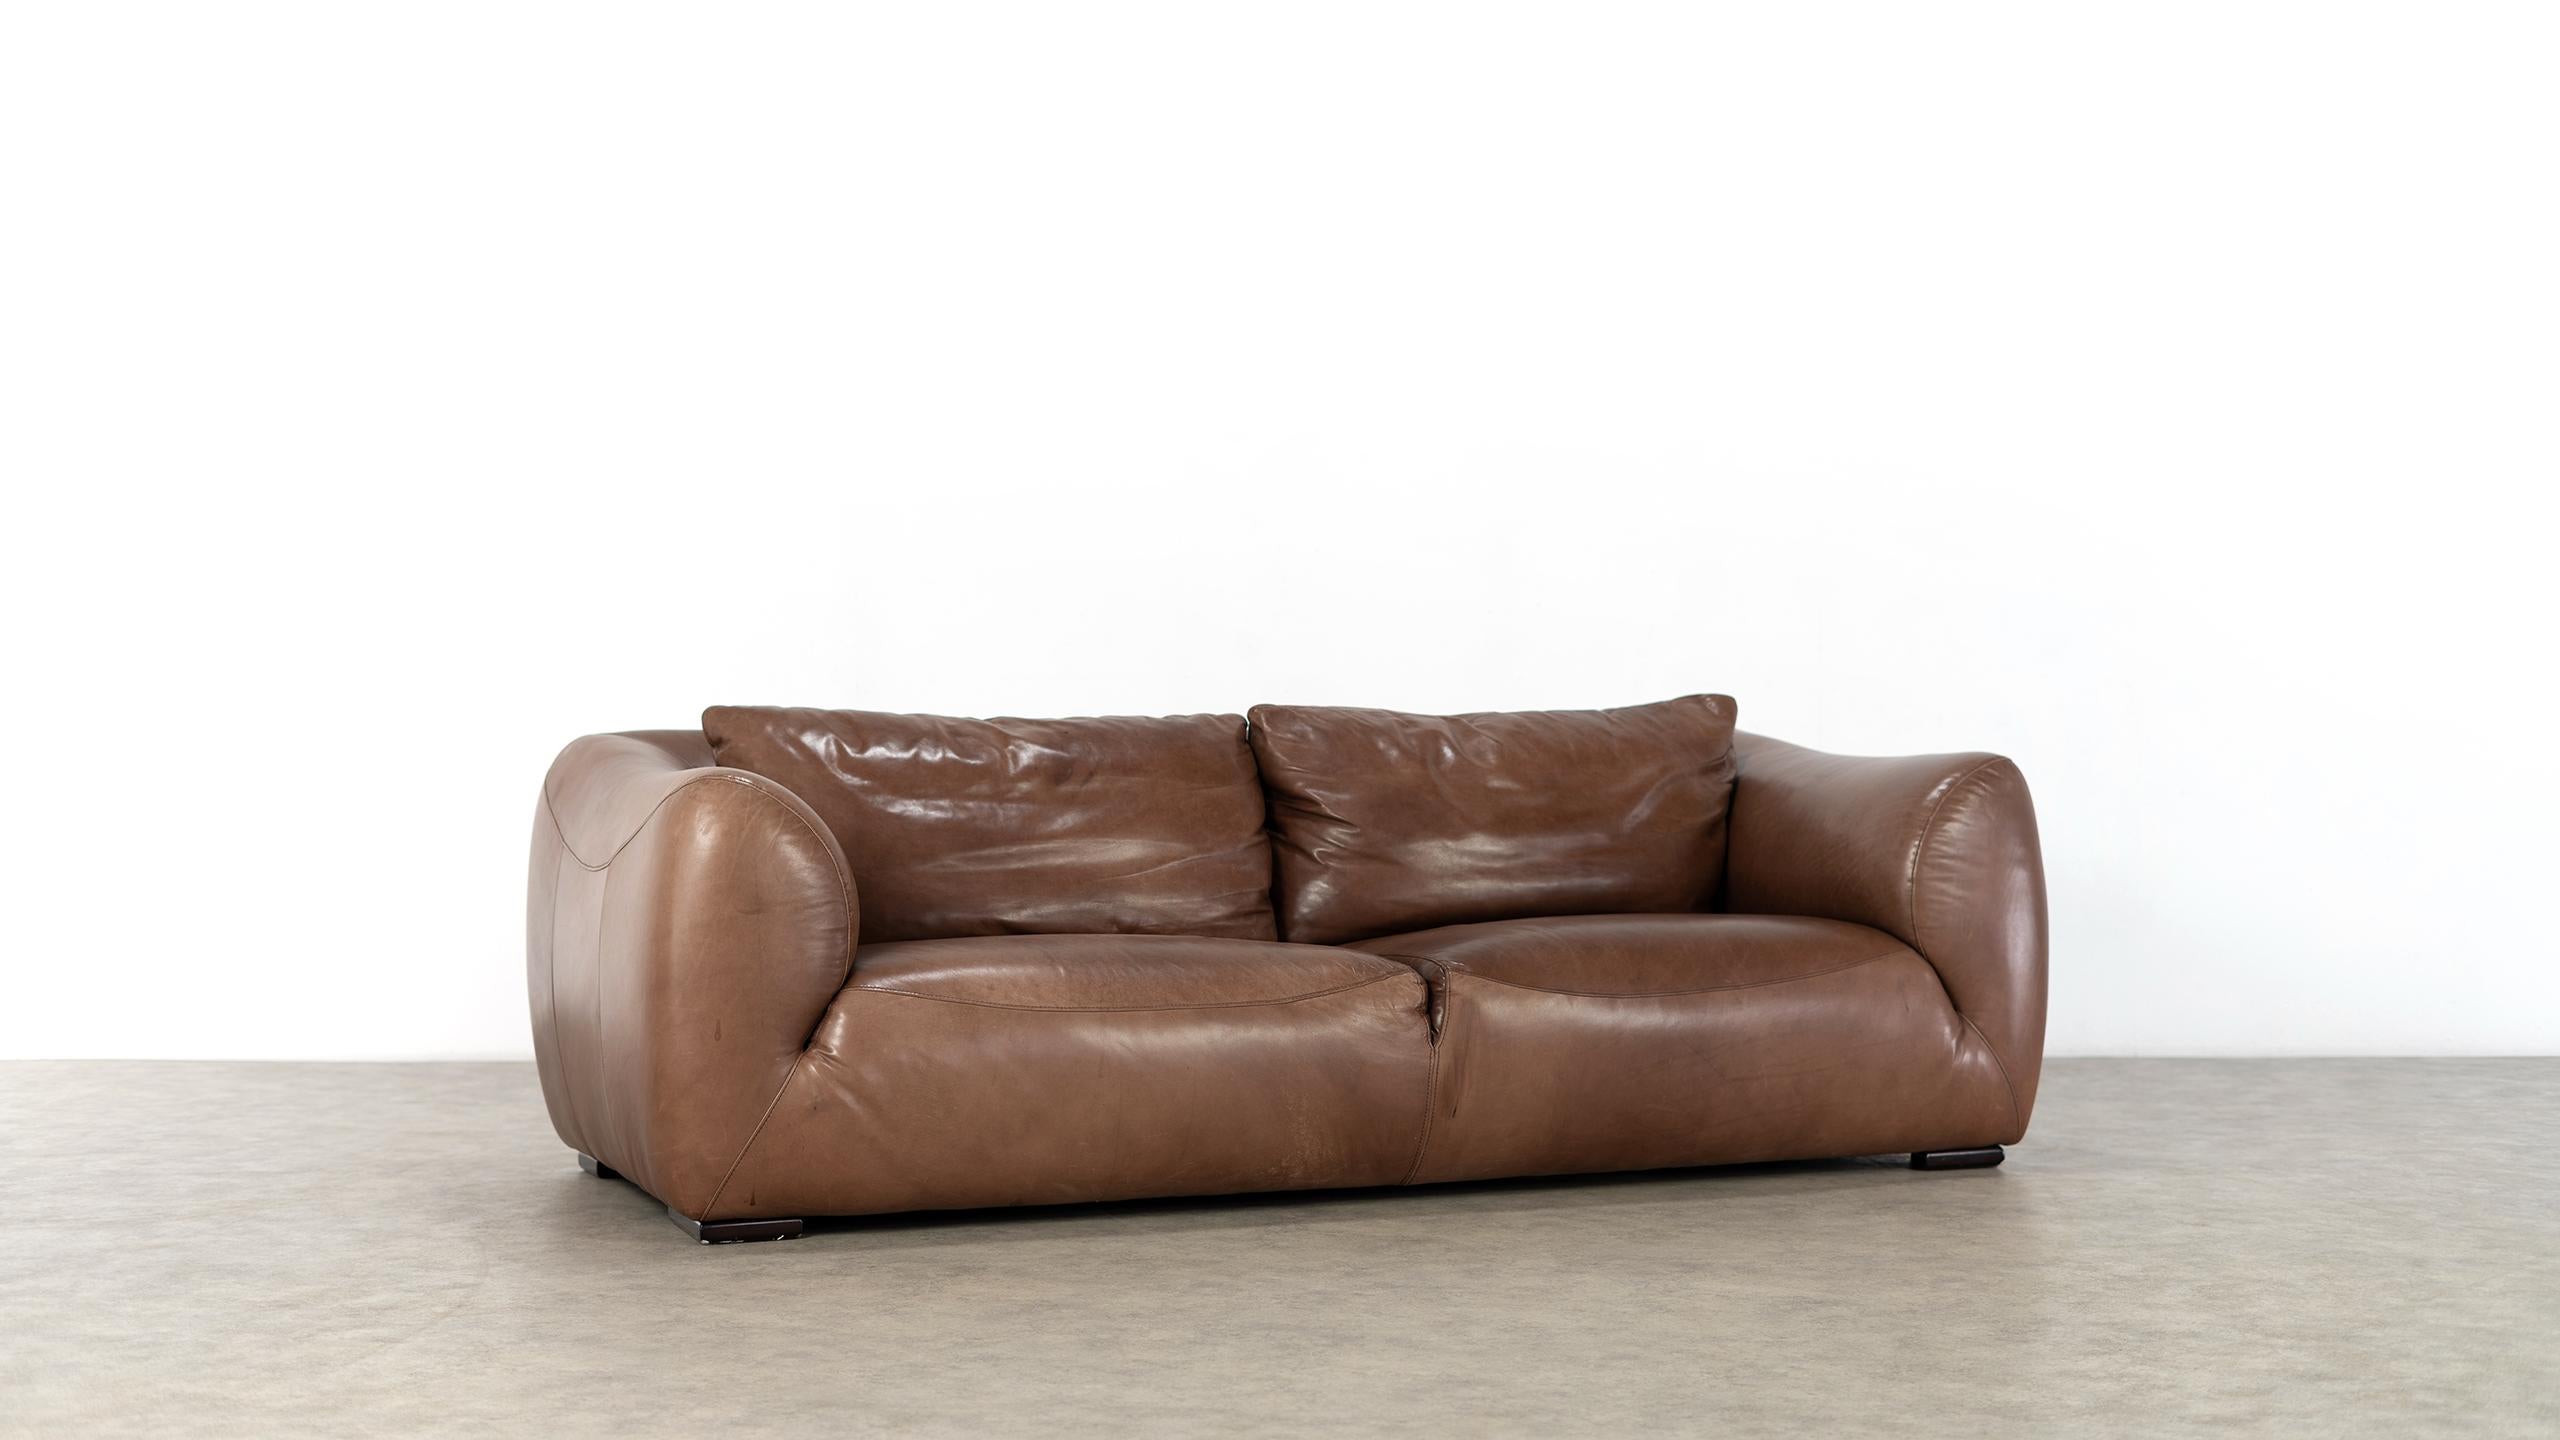 Absolutely casual and impressive 2 seater sofa in finest, chocolate - coloured leather - we attribute it to the Dutch designer Gerard van den Berg, ca. 1970.

All seams are curved, which gives the sofa its character. The back cushions are held in